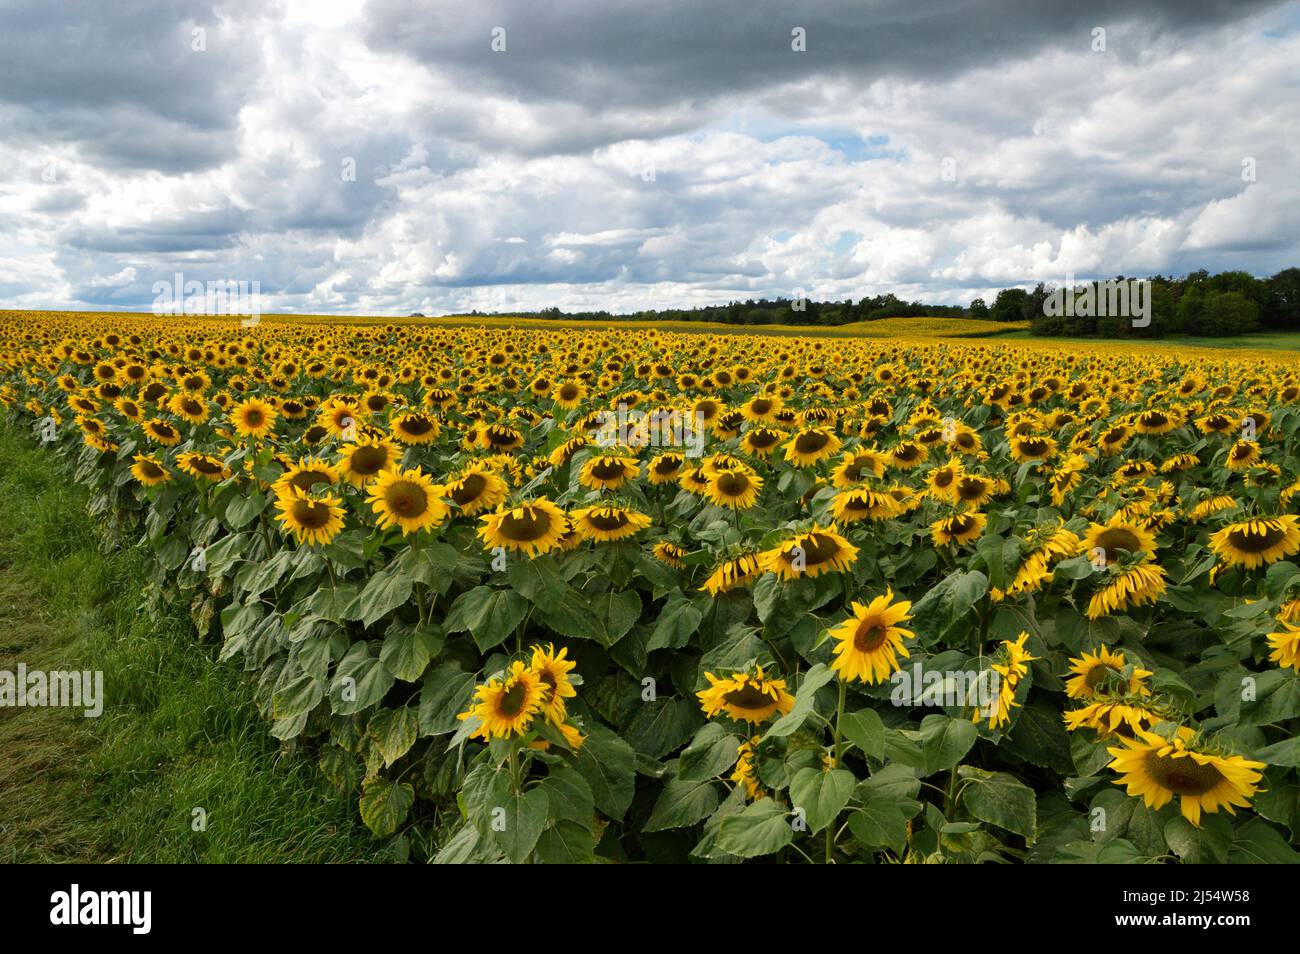 A beautiful sunflower field for making sunflower oil or biofuel. Stock Photo